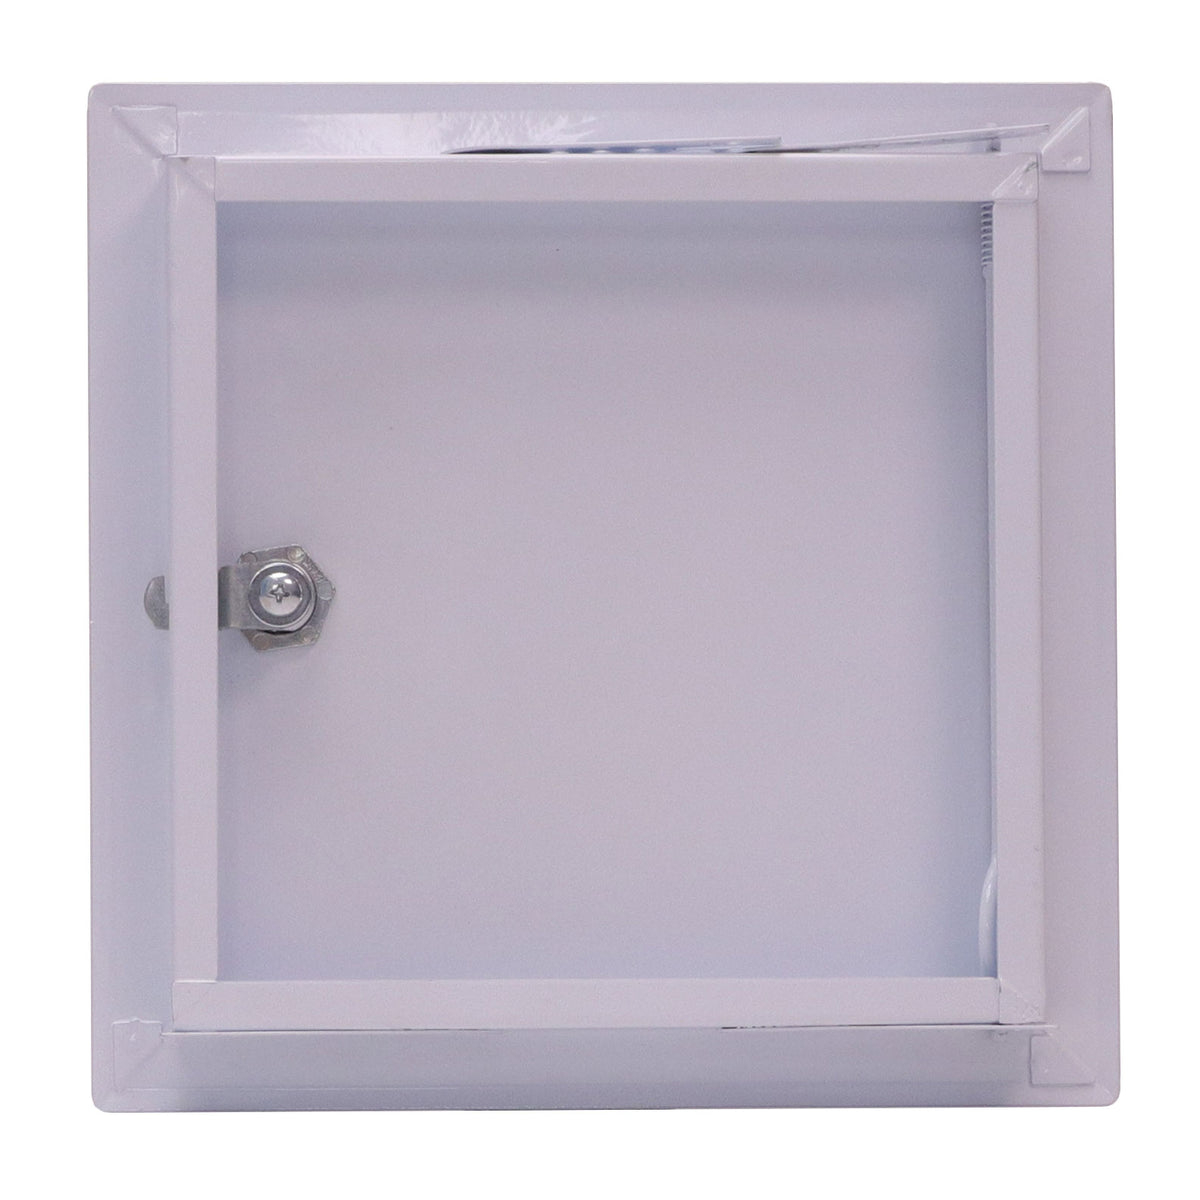 6&quot; X 6&quot; Steel Access Panel Removable Door For Wall / Ceiling Application (Lock and Key) With Frame - [Outer Dimensions: 7&quot; Width X 7&quot; Height]